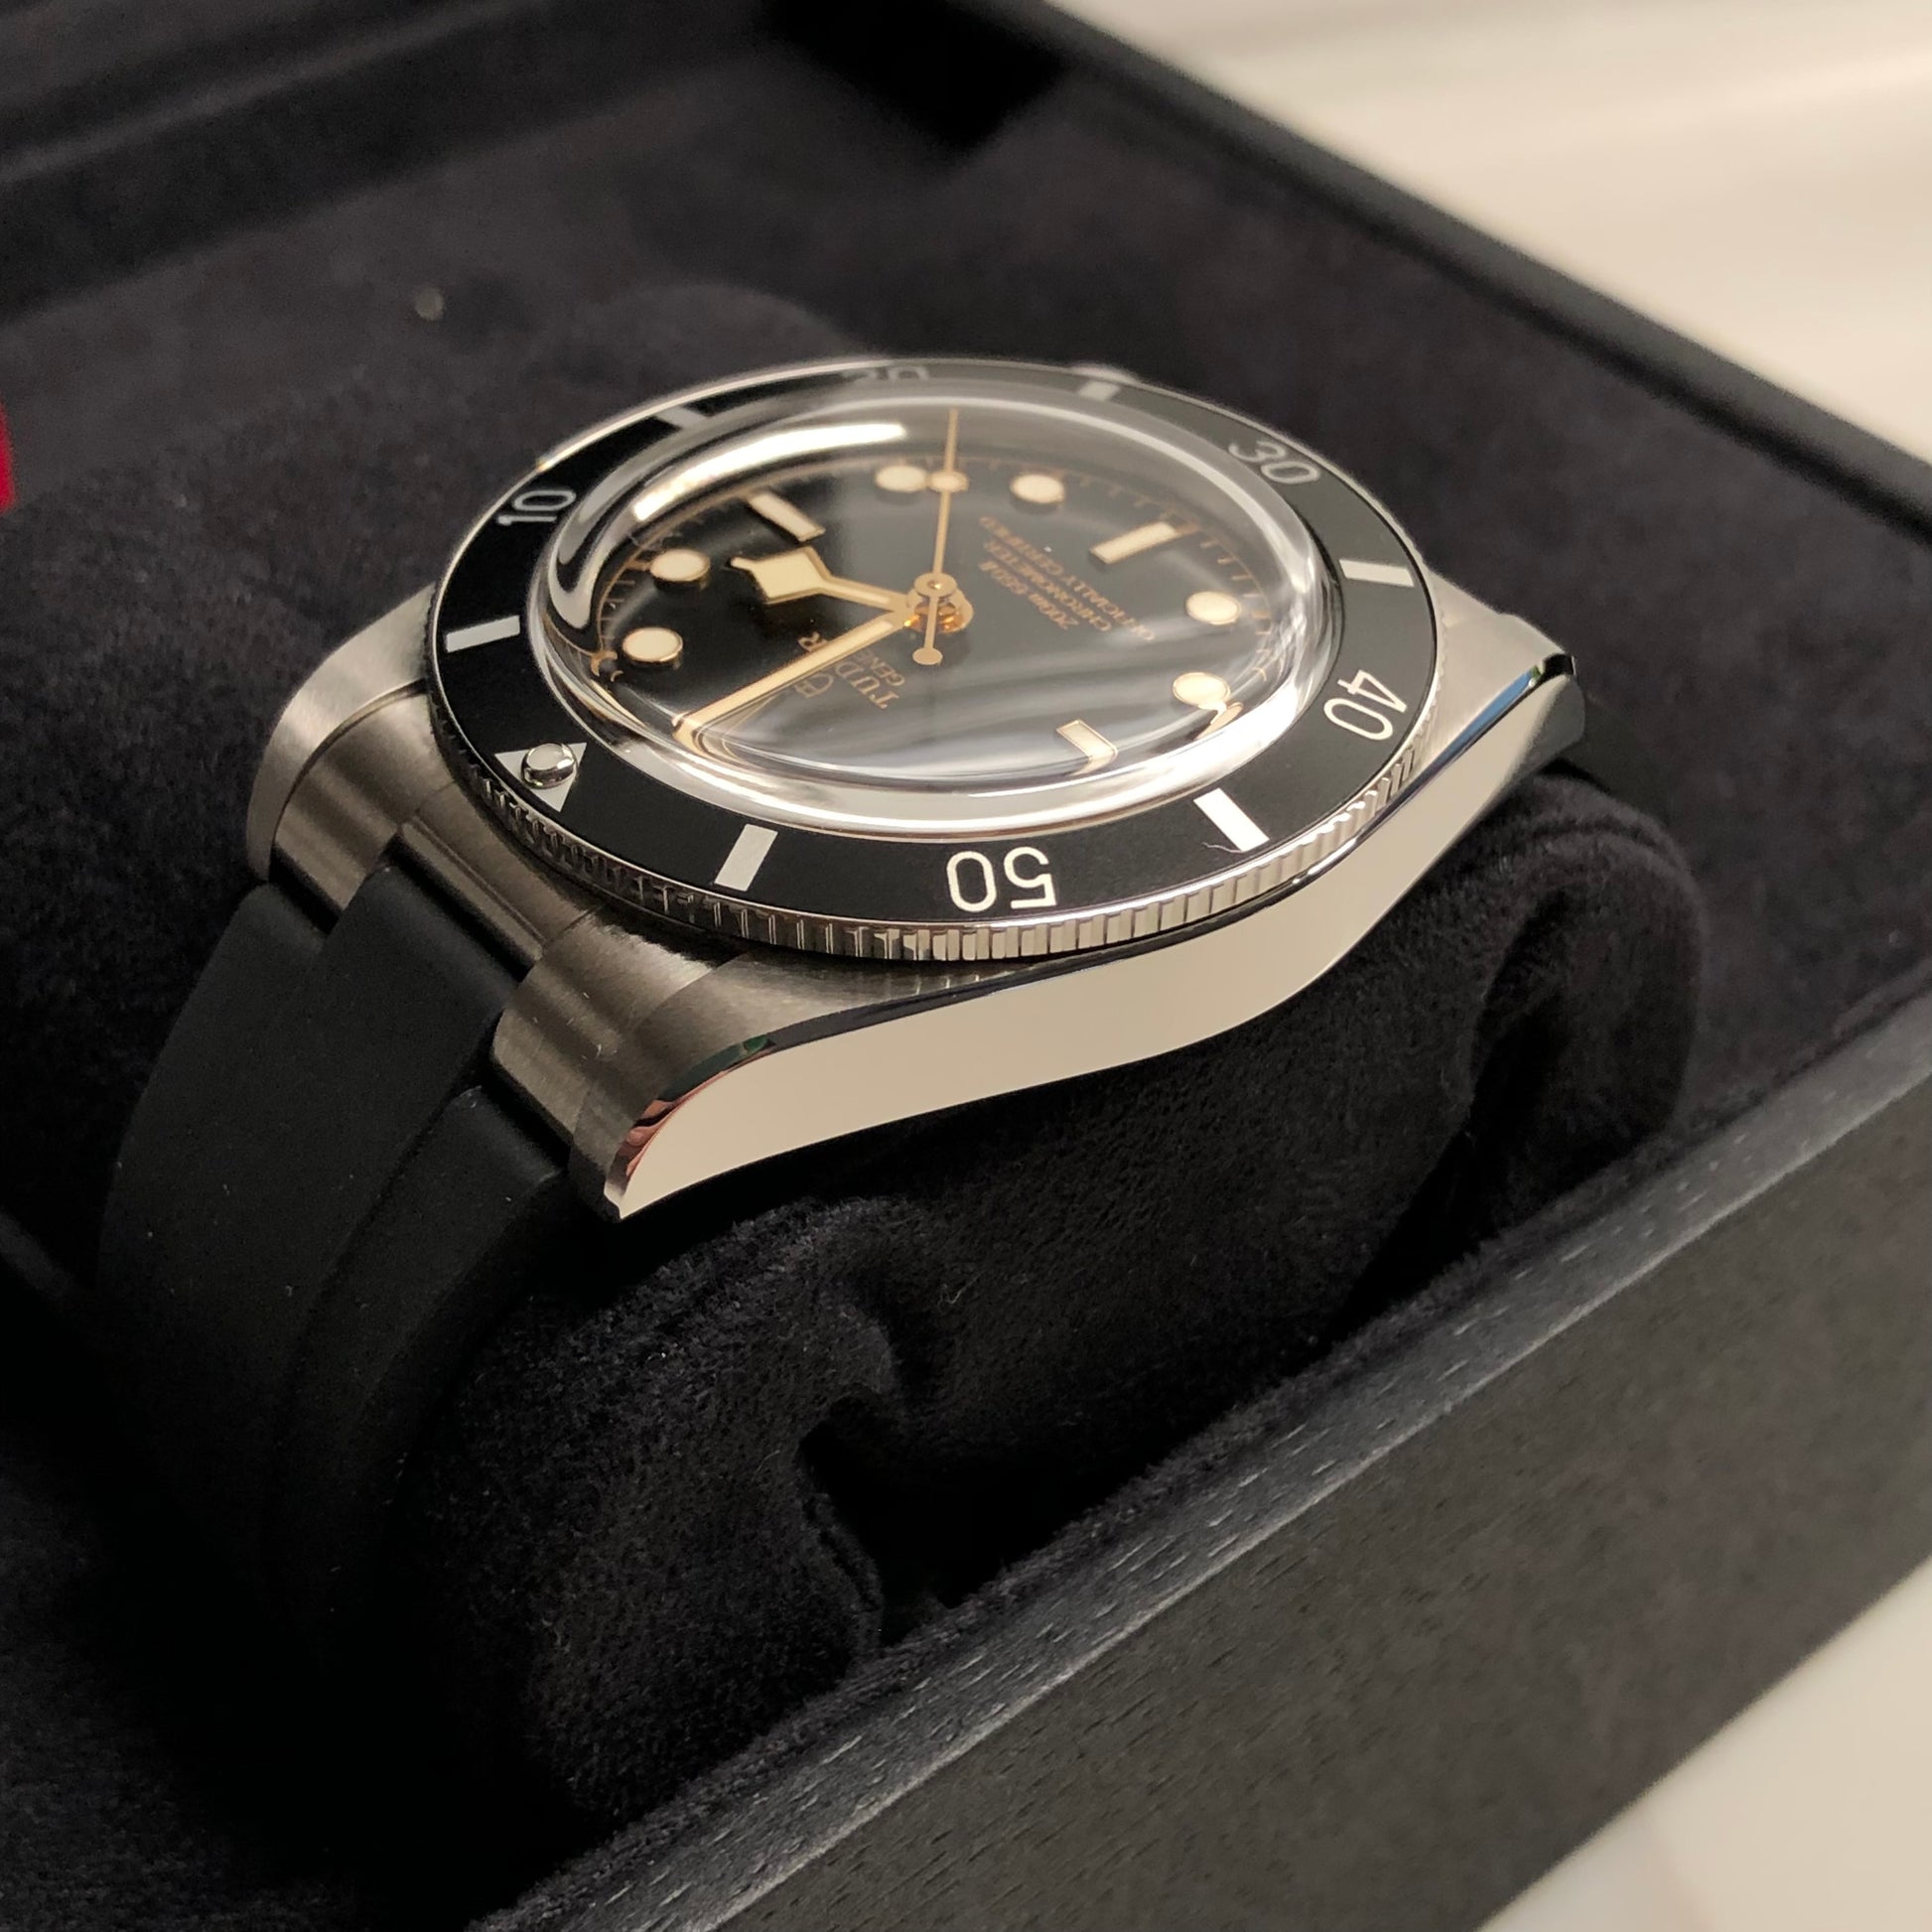 2023 Tudor Black Bay 54 79000N Black Steel Rubber Wristwatch with Box and Papers - HASHTAGWATCHCO